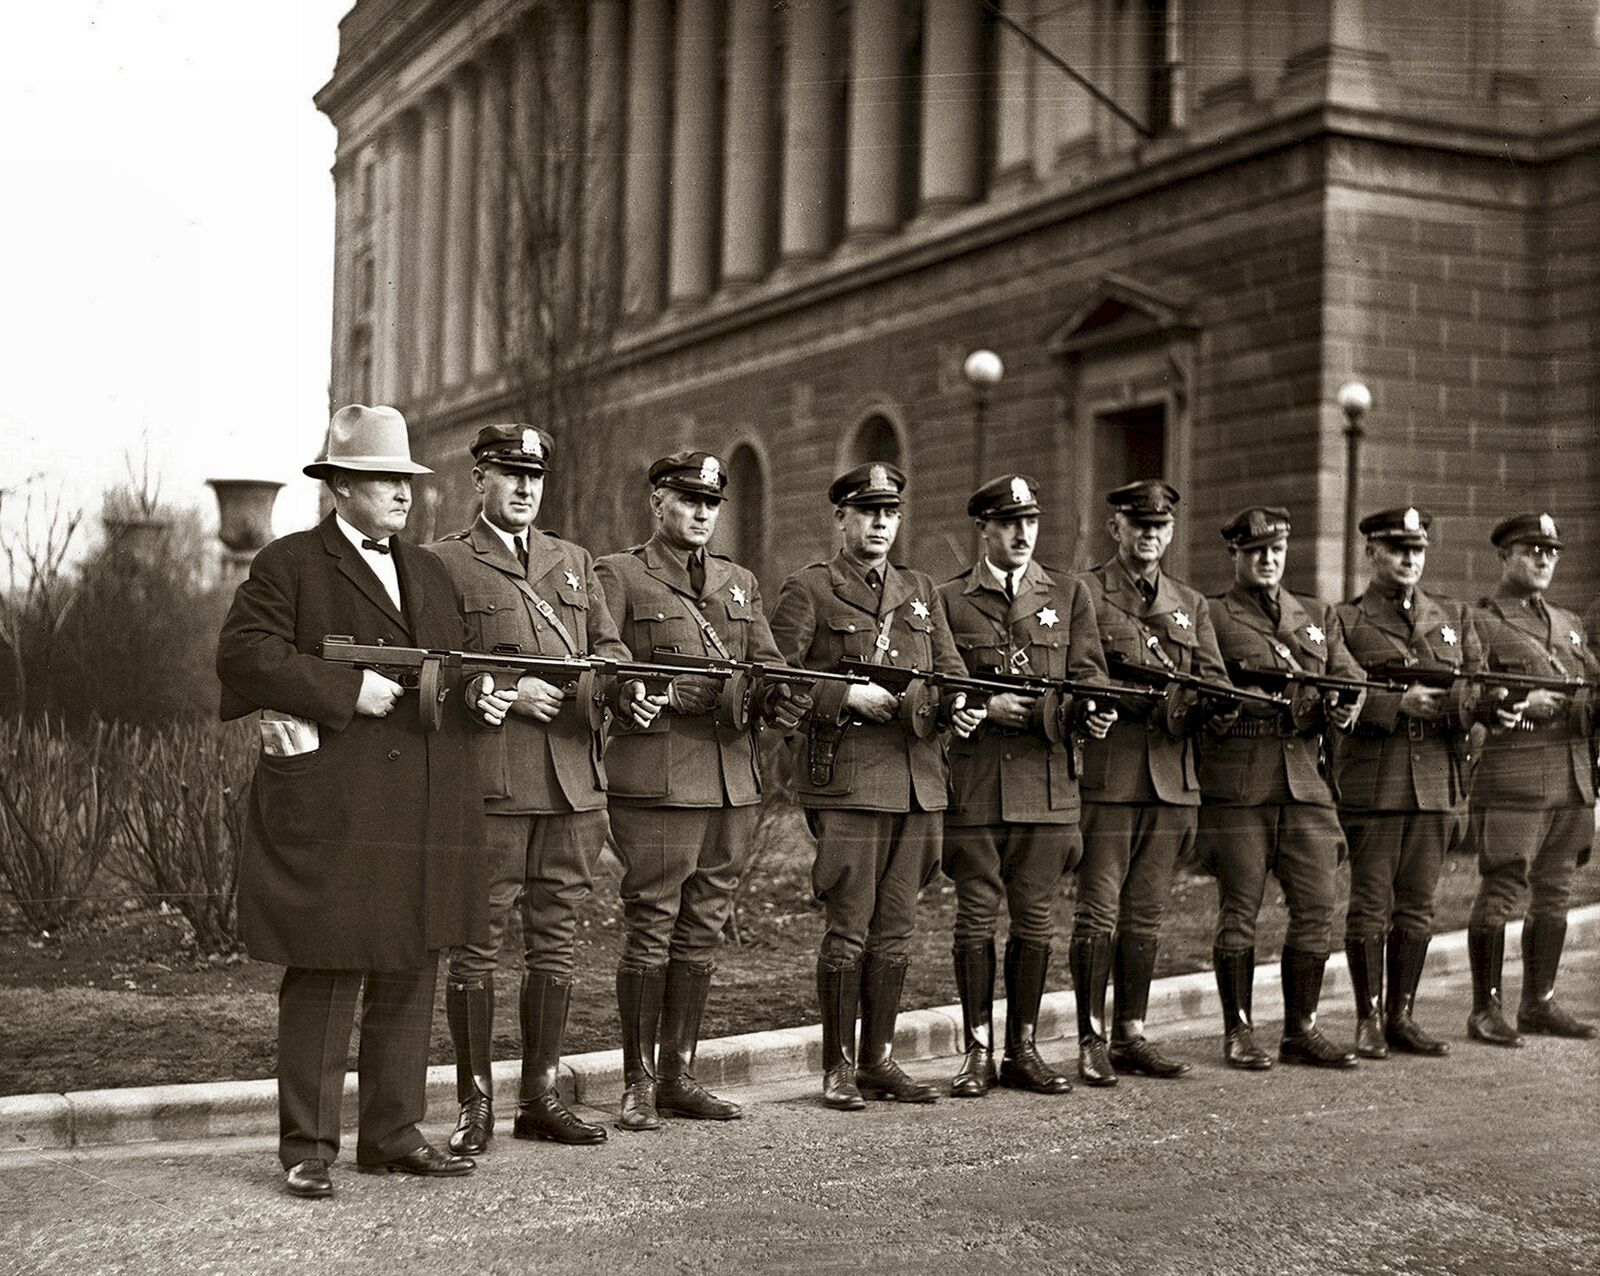 1930s SPRINGFIELD ILL POLICE with TOMMY GUNS Photo  (177-L)